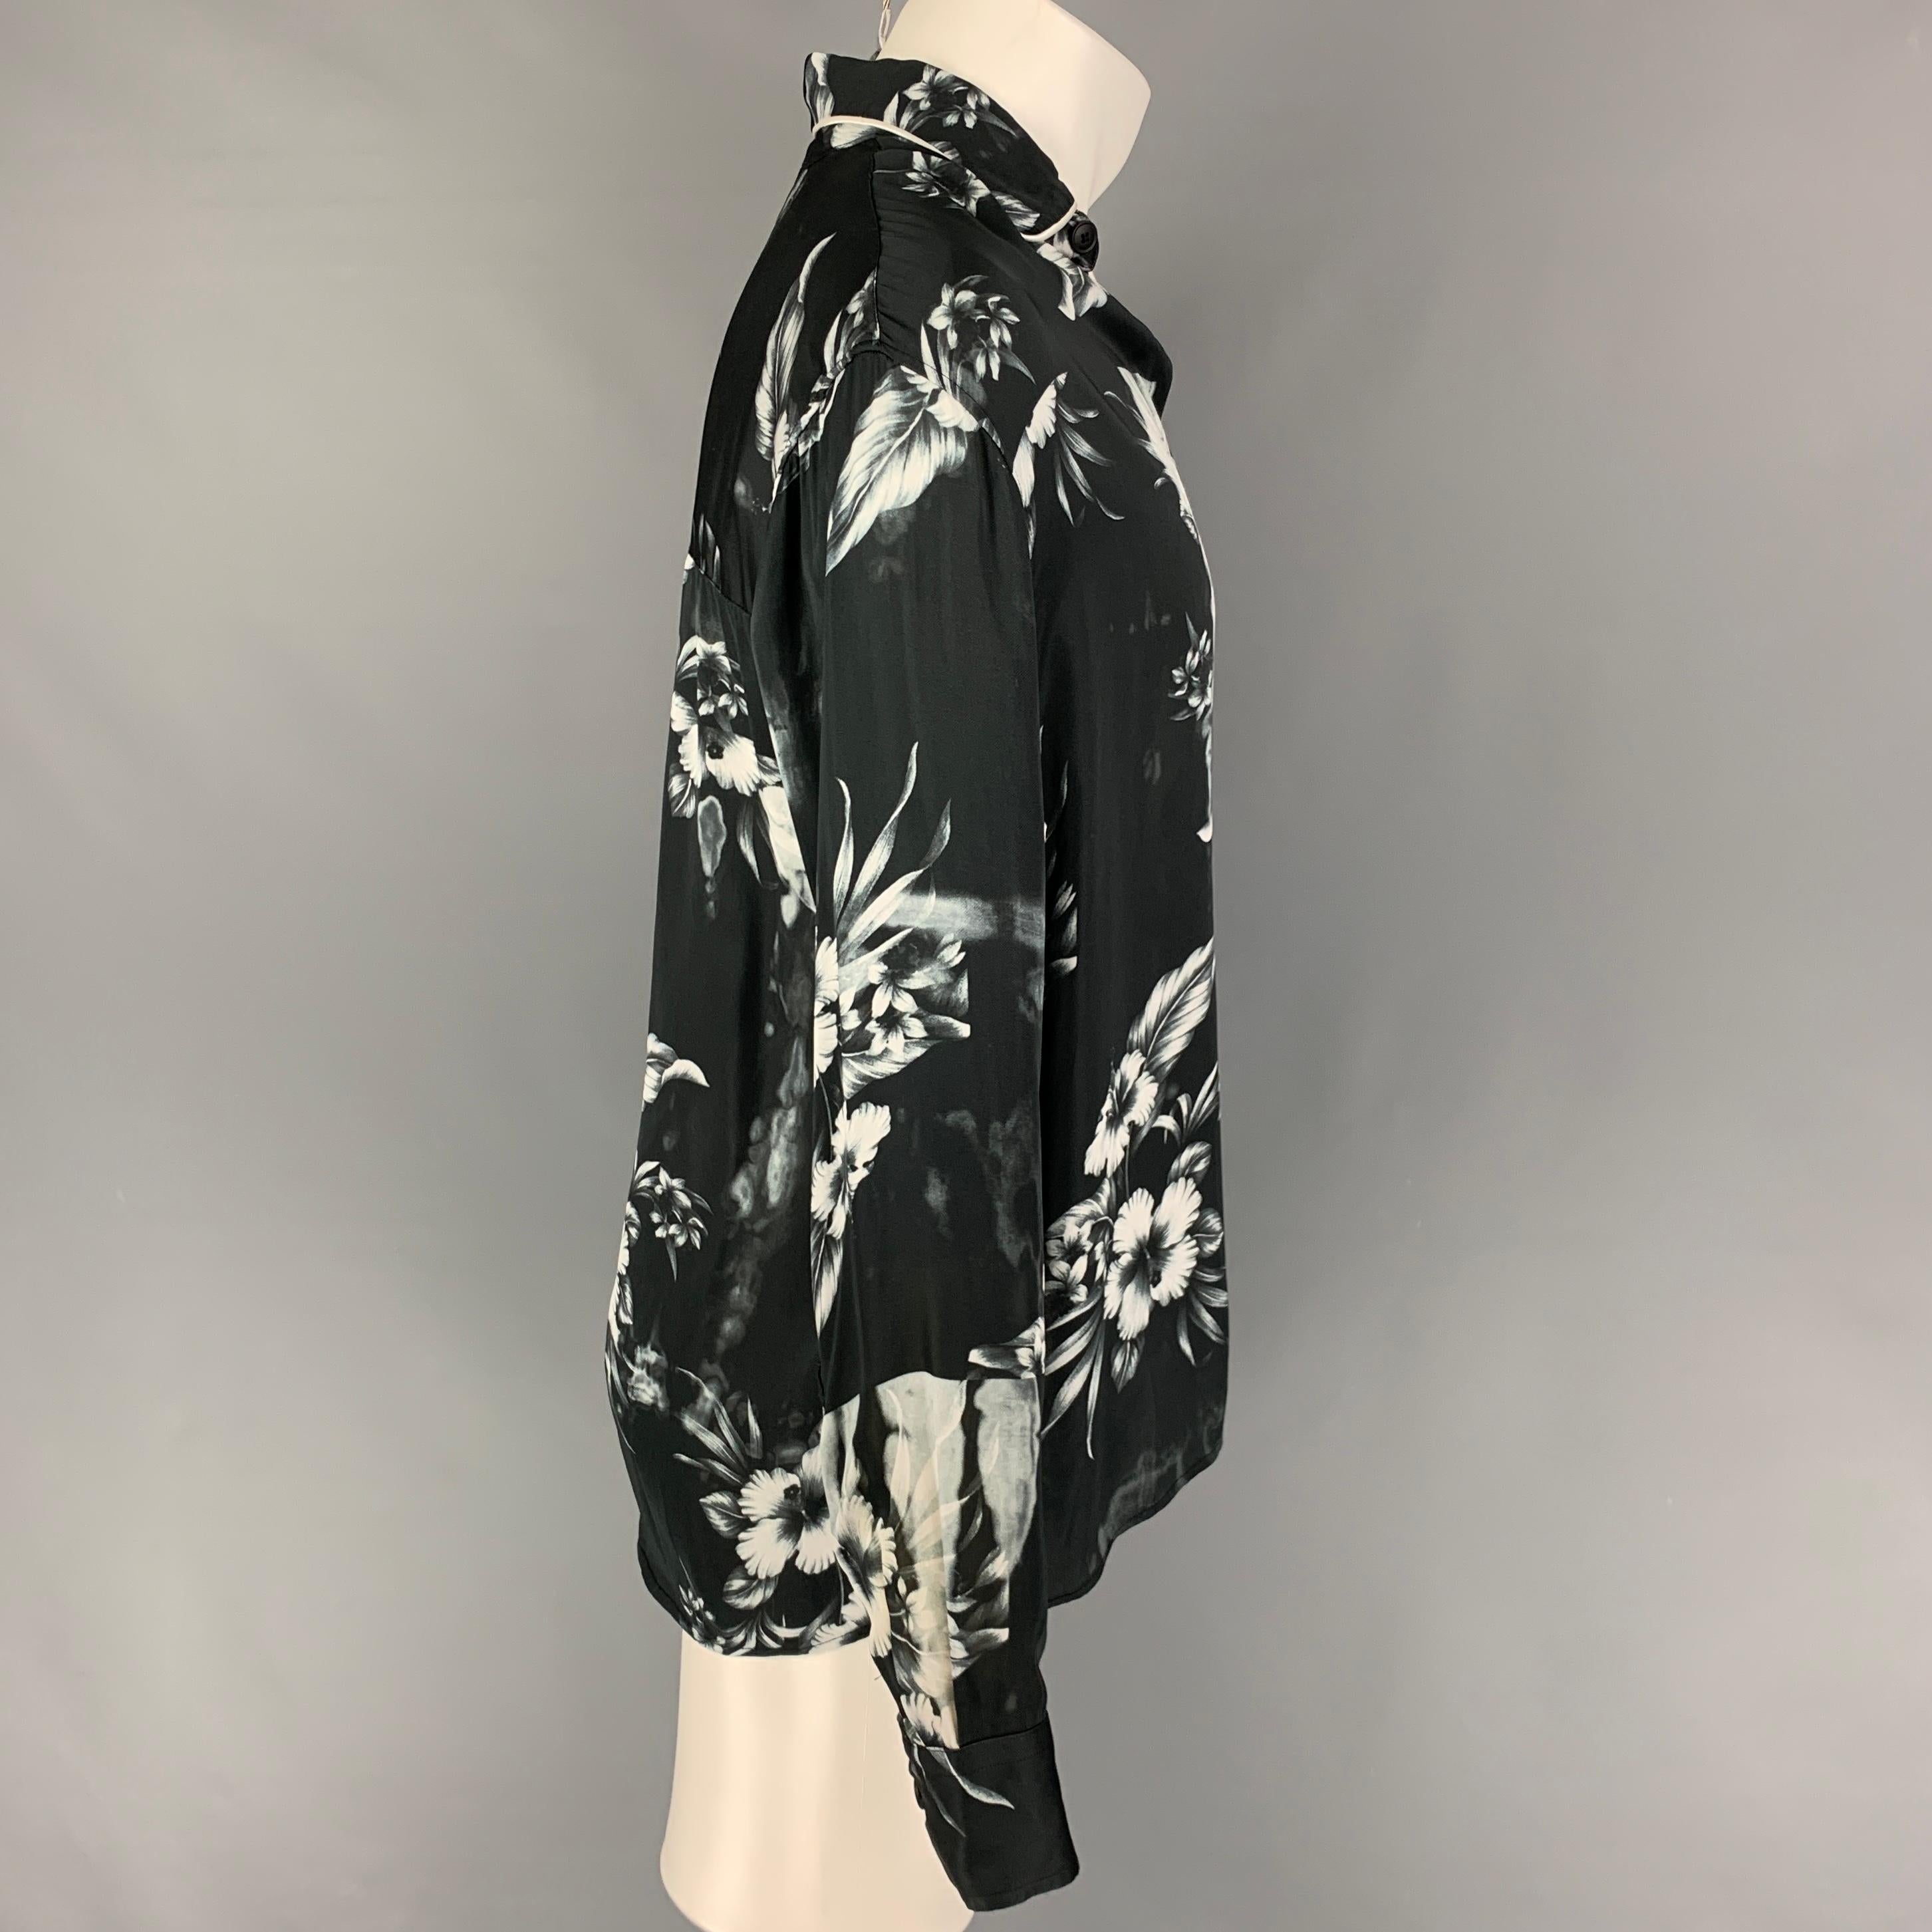 REPRESENT long sleeve shirt comes in a black & white floral viscose featuring a loose fit, spread collar and a button up closure. 

Very Good Pre-Owned Condition.
Marked: S

Measurements:

Shoulder: 19 in.
Chest: 48 in.
Sleeve: 25 in.
Length: 29 in. 